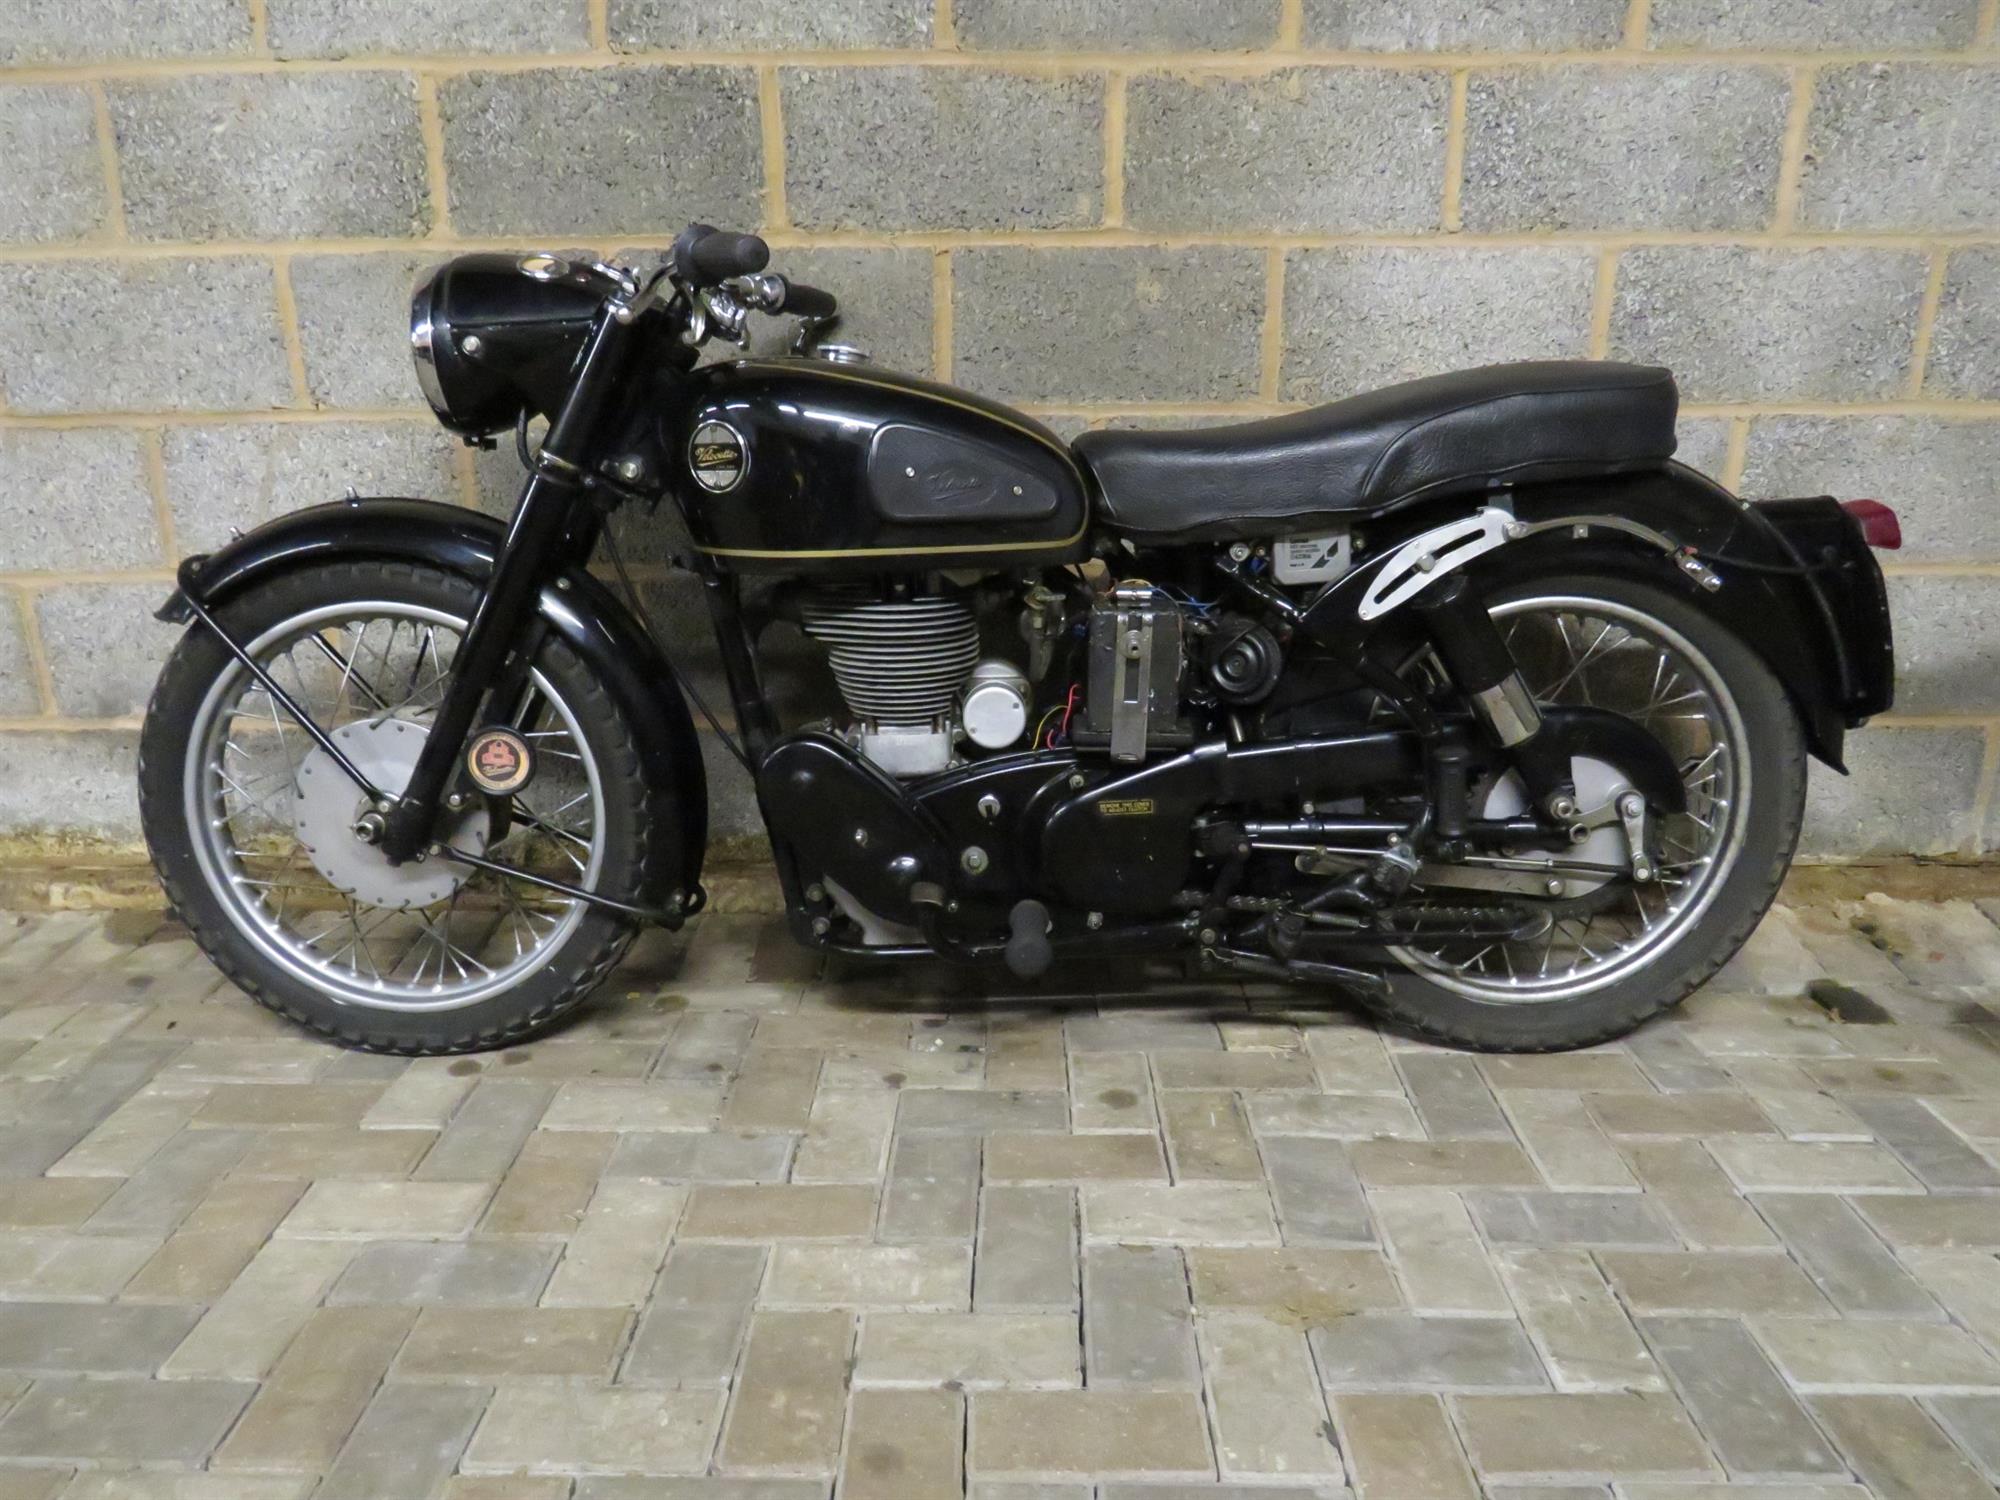 1959 Velocette MSS 500cc - Image 2 of 10